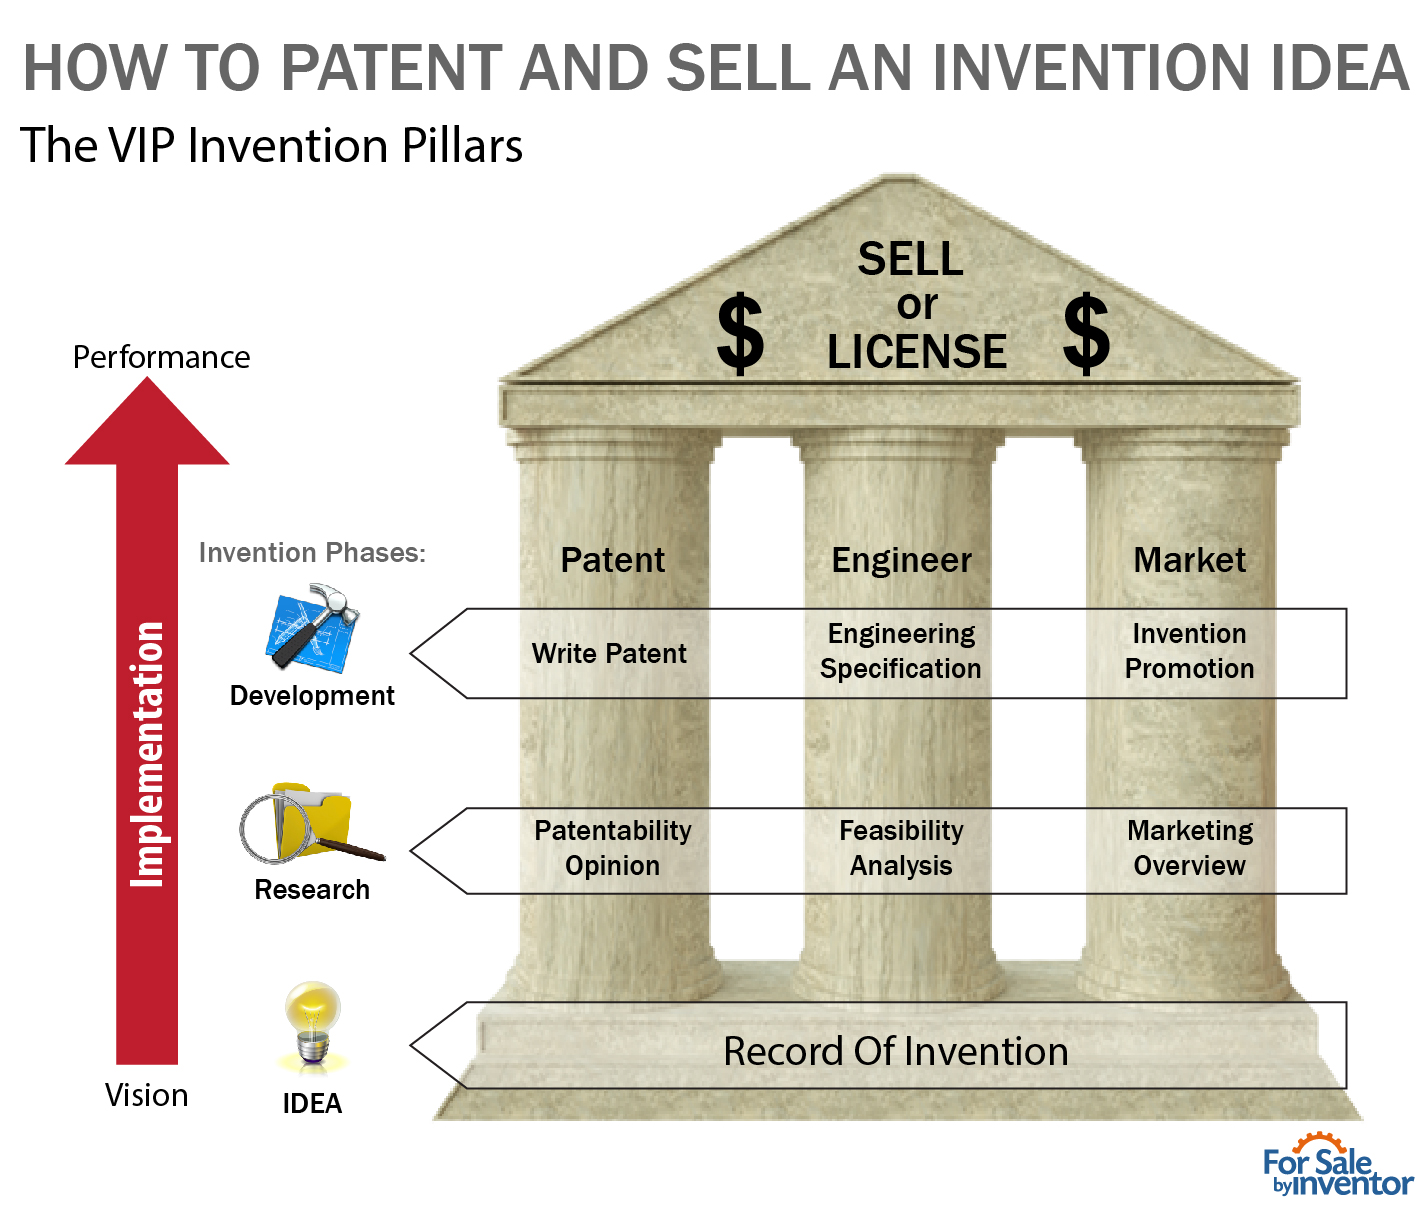 How To Patent and Sell an Invention Idea